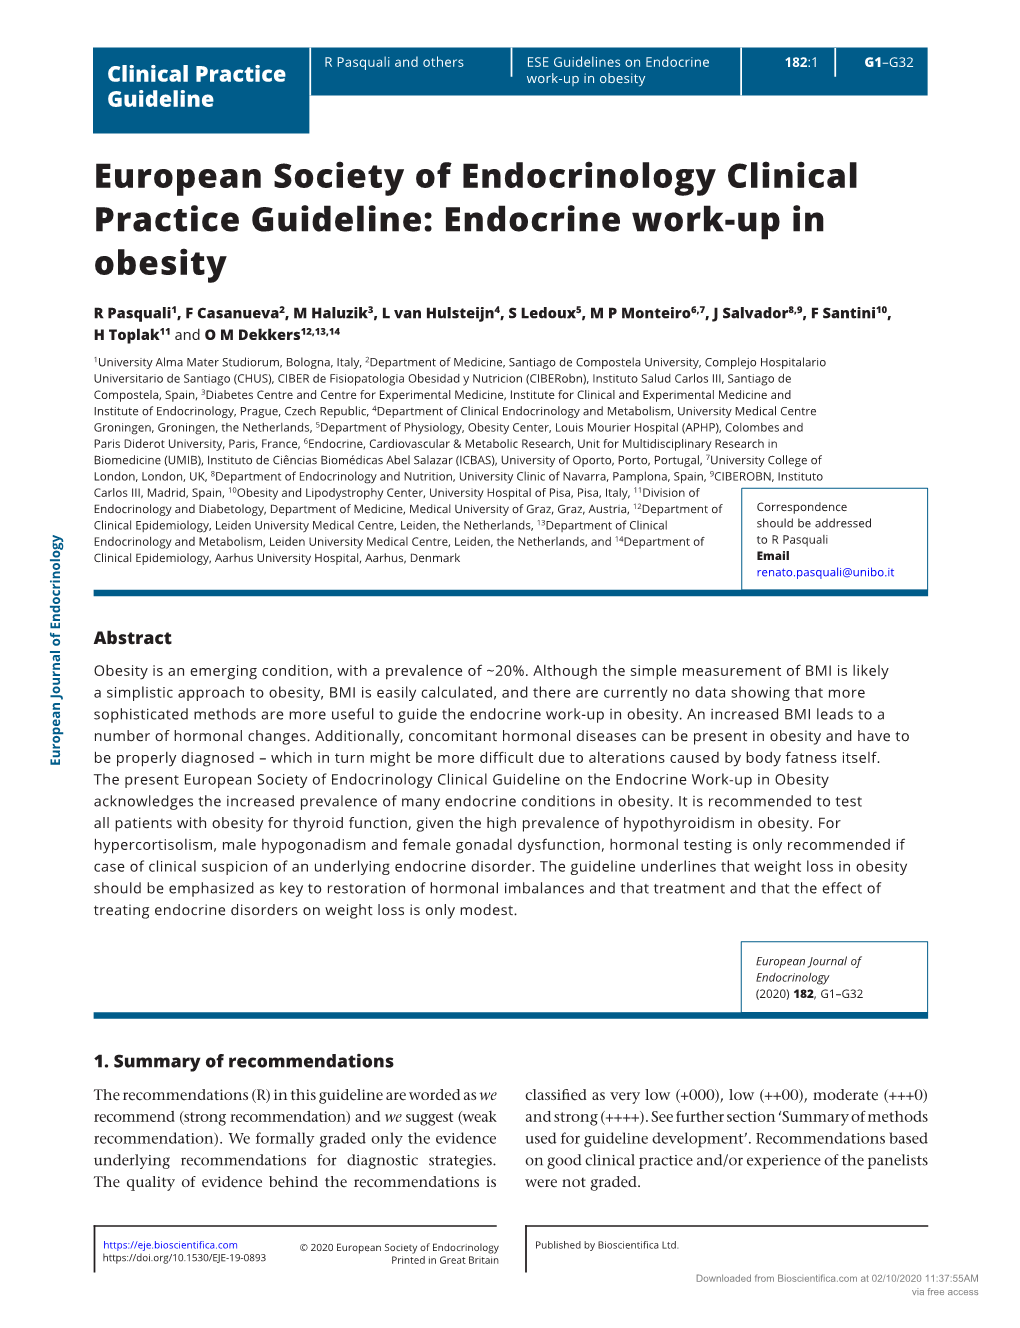 European Society of Endocrinology Clinical Practice Guideline: Endocrine Work-Up in Obesity